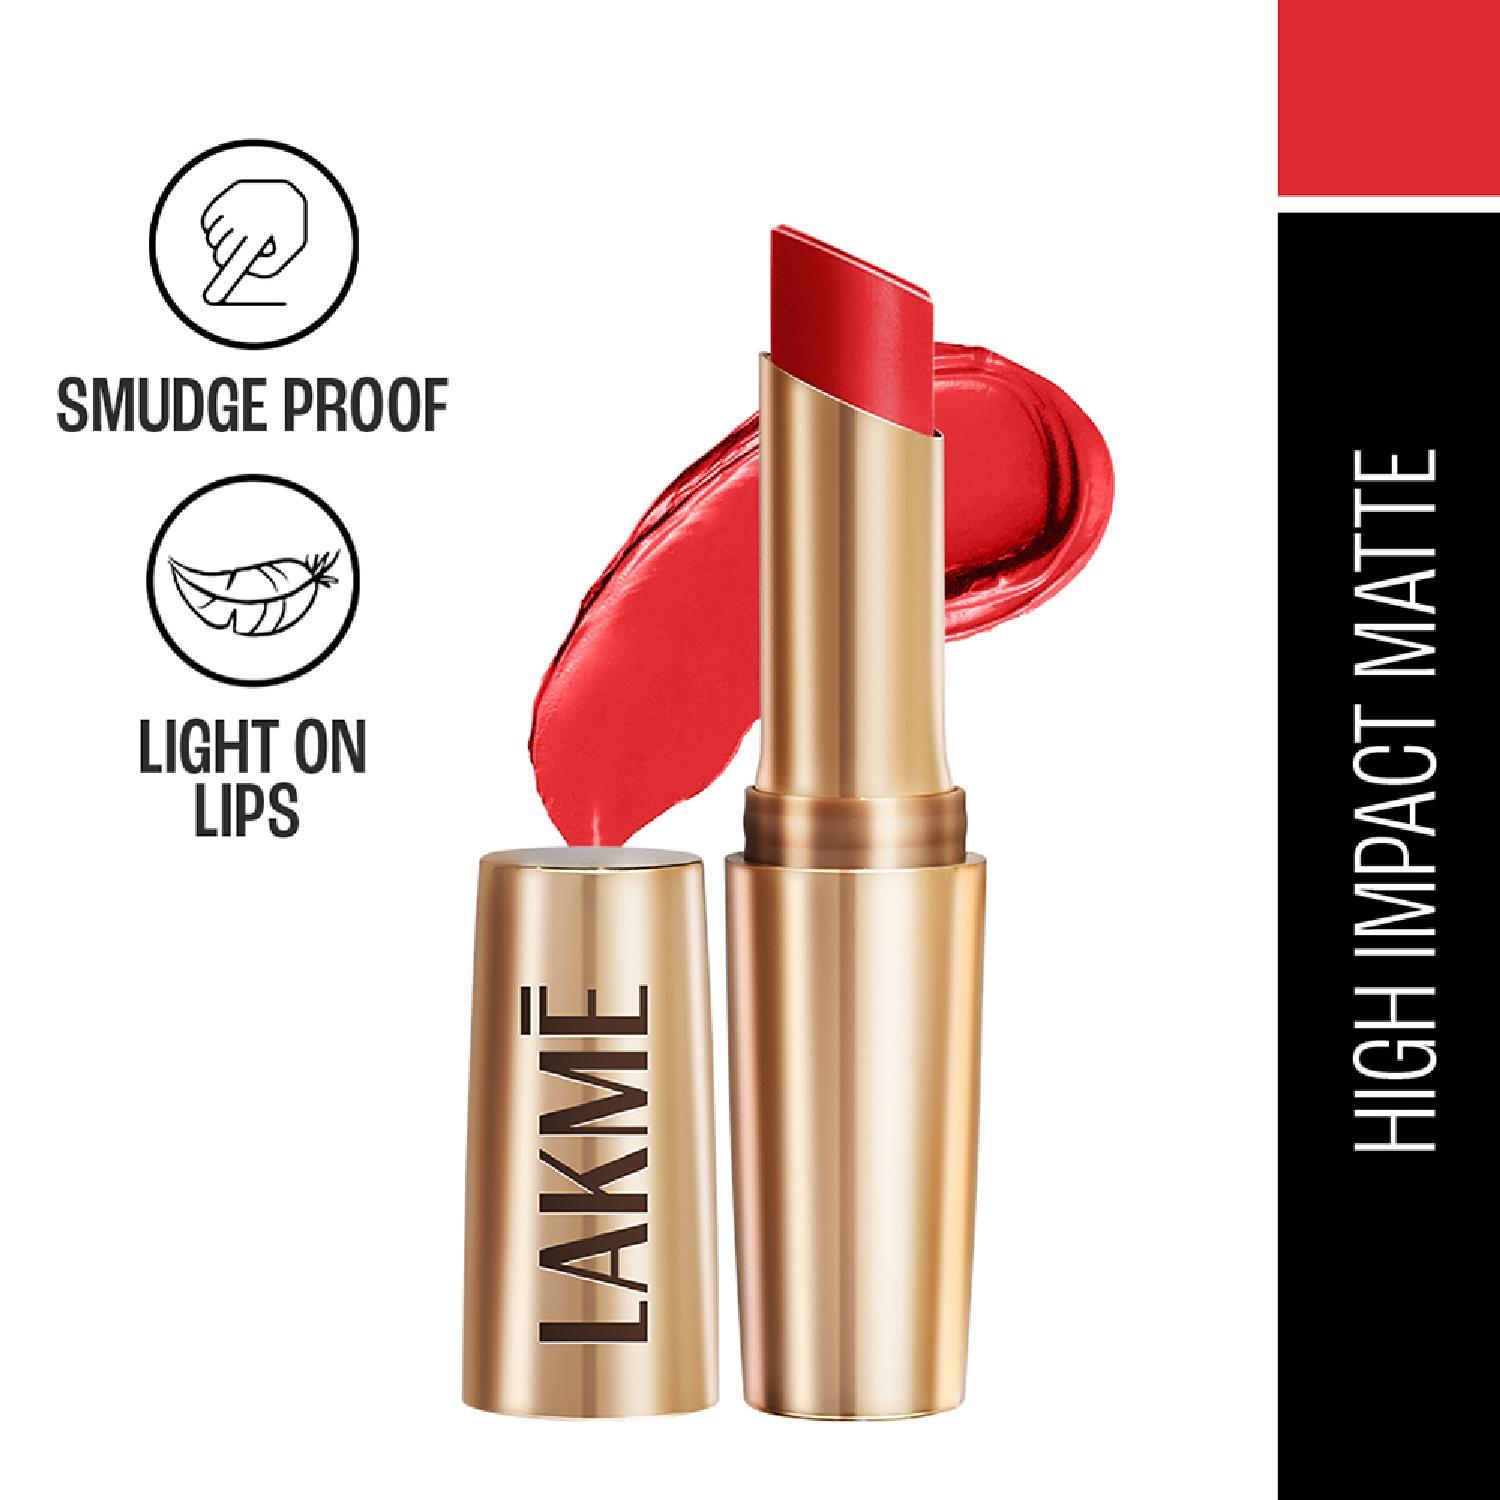 Lakme | Lakme 9 to 5 Powerplay Priming Matte Lipstick, Lasts 16hrs, Red Letter (3.6g)